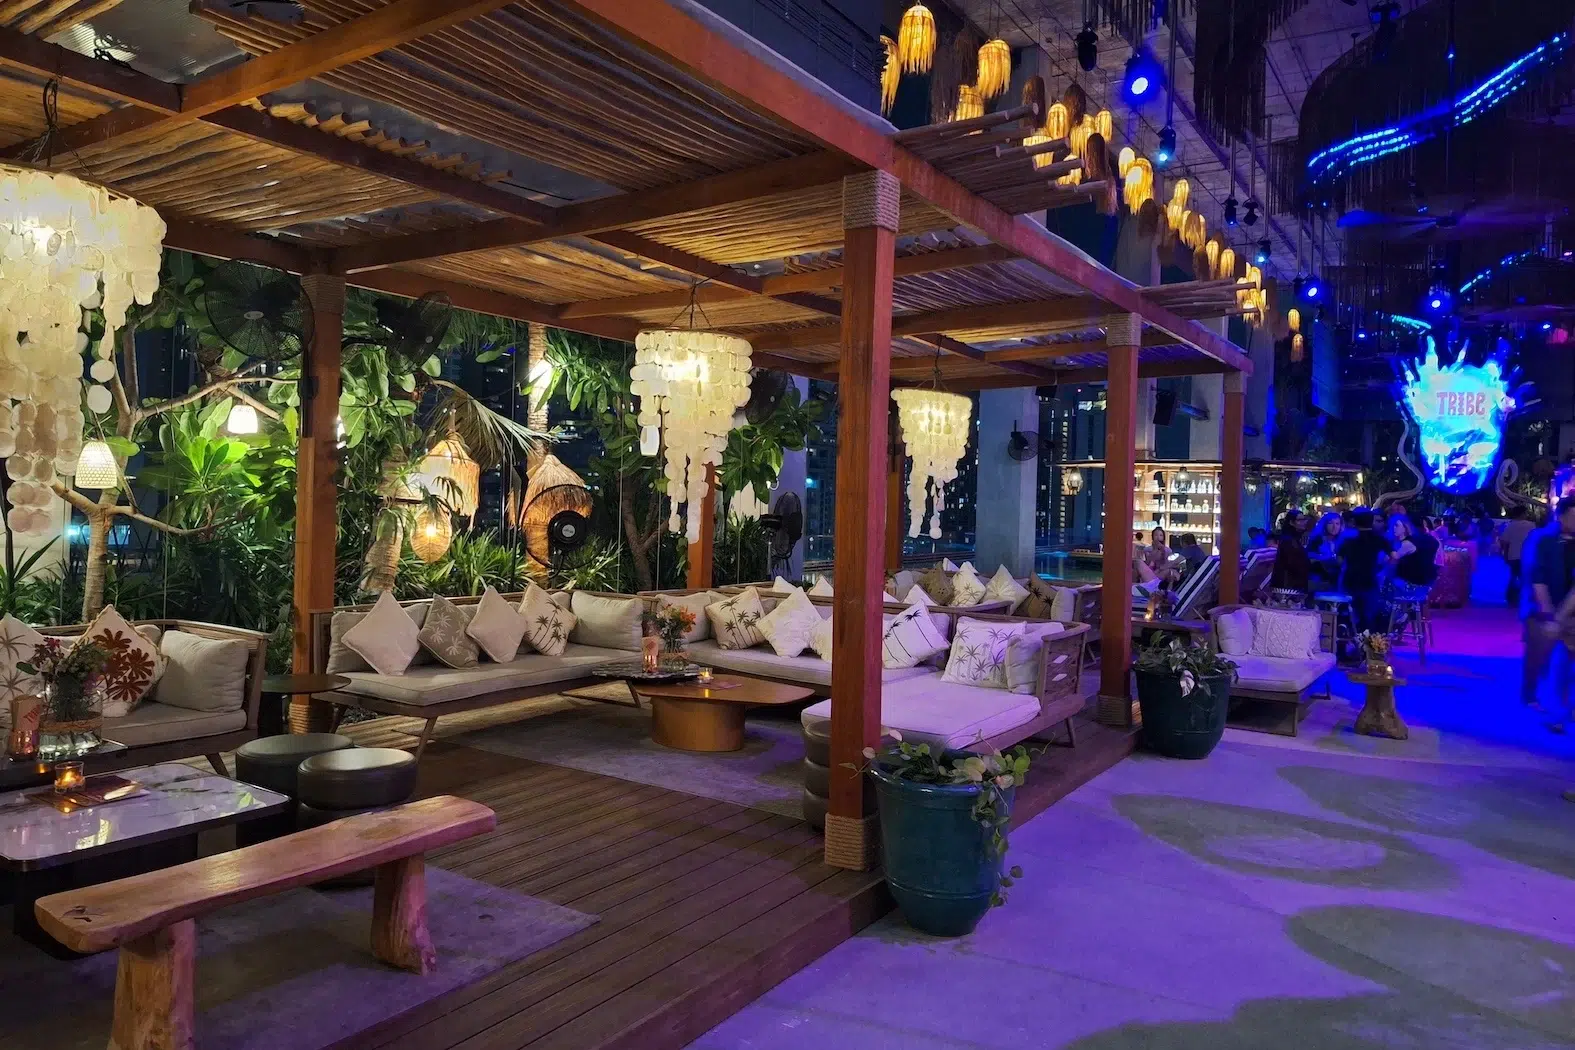 This photo shows the sofas from Tribe Sky Beach Club located at EmSphere in Bangkok. You can see a mexican-like decor. This place seems to have a cozy vibe atmosphere.